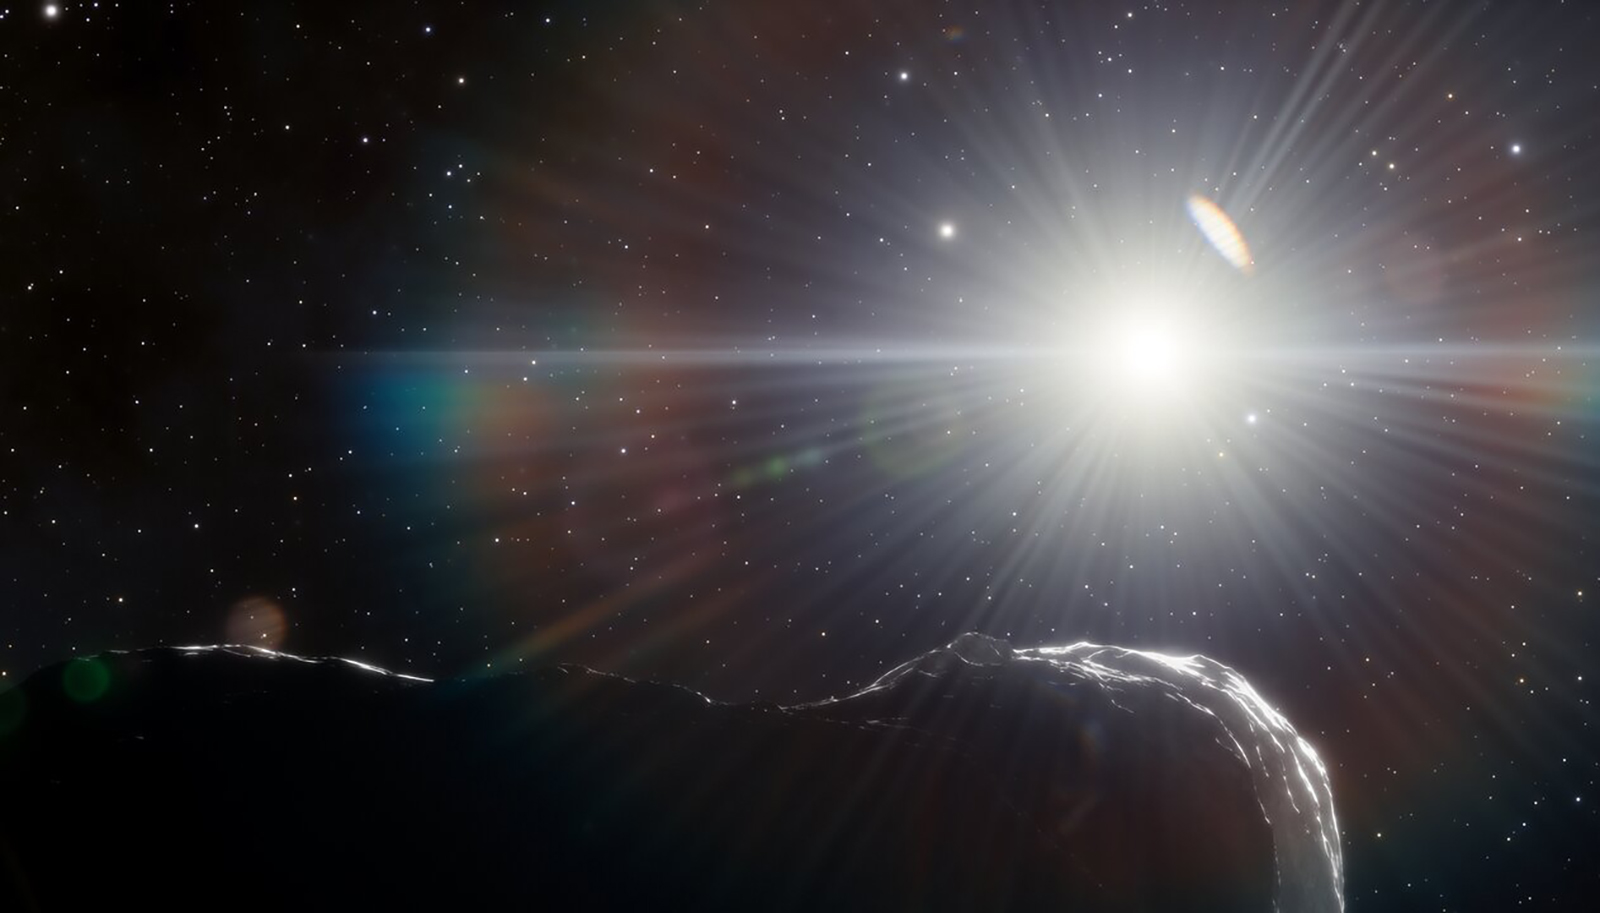 ‘Planet Killer’ Asteroid Spotted in Sun’s Glare